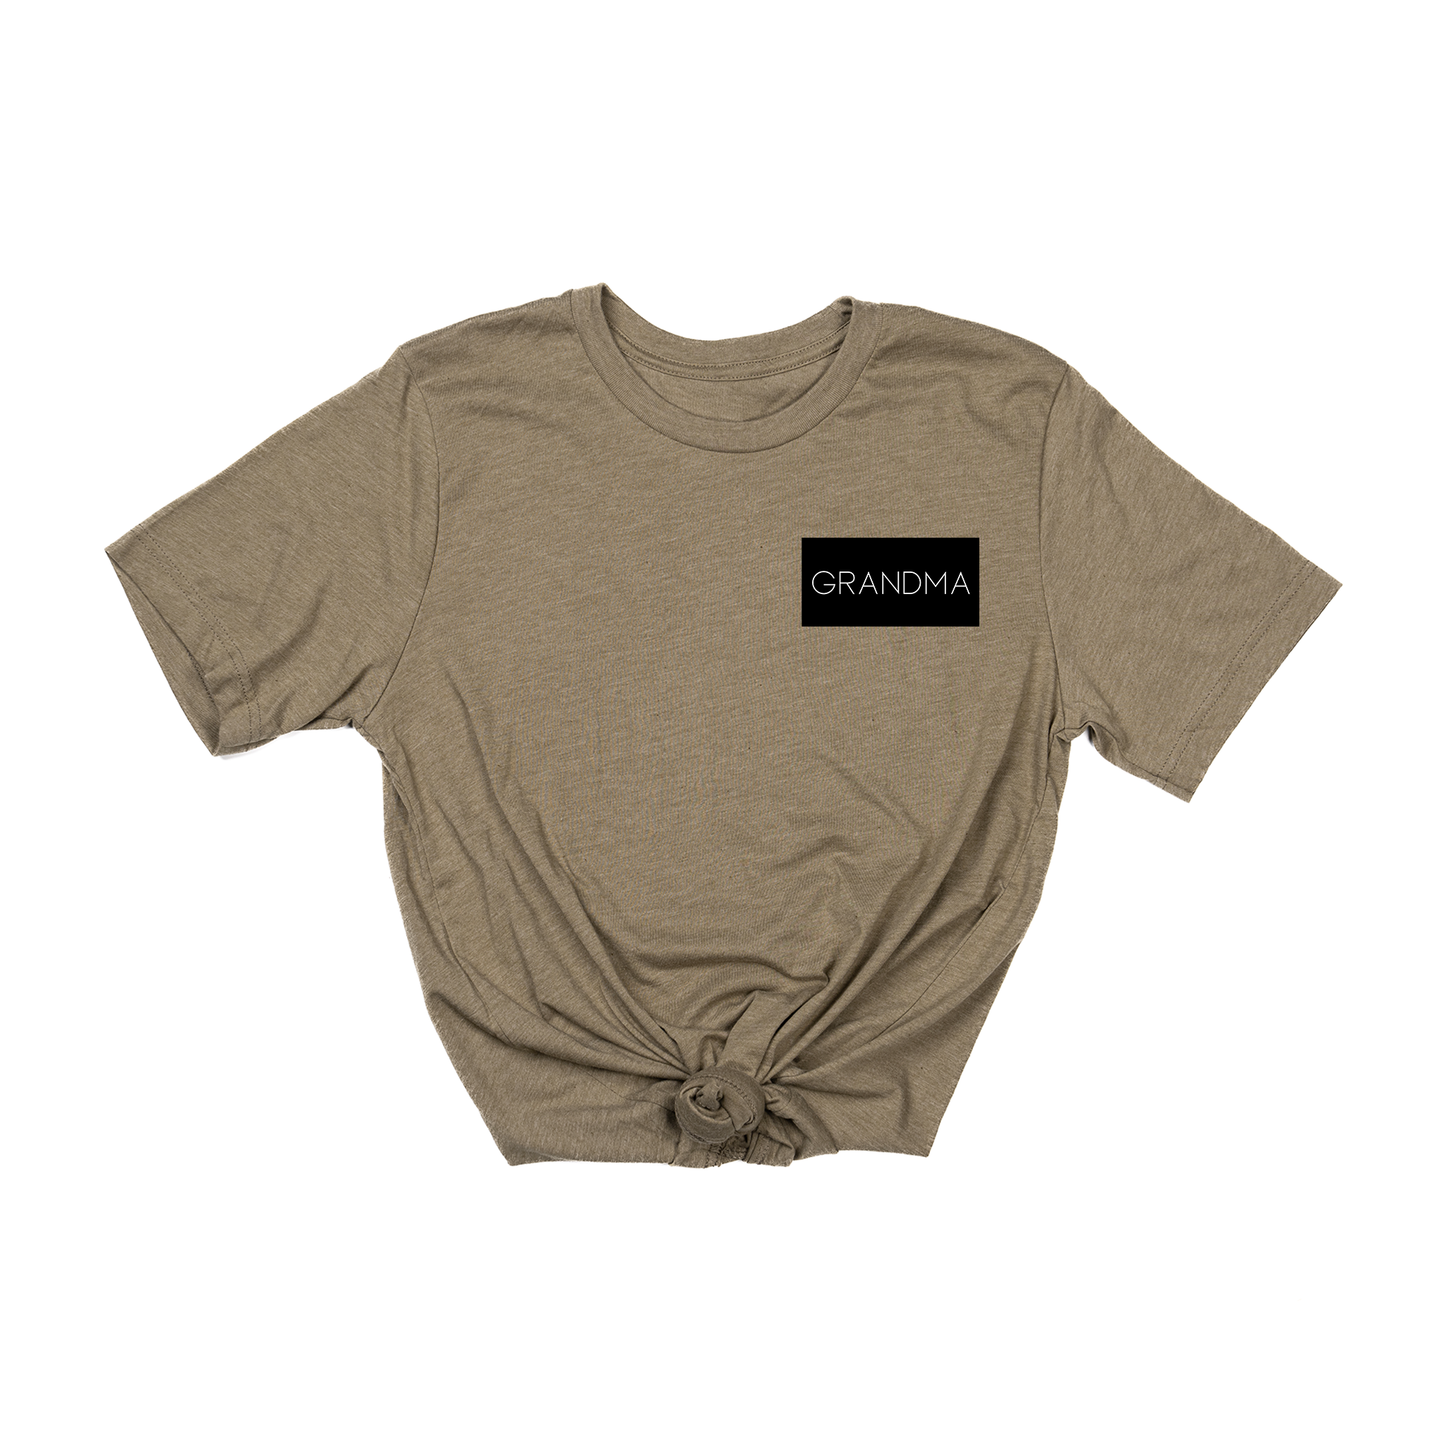 Grandma (Boxed Collection, Pocket, Black Box/White Text) - Tee (Olive)